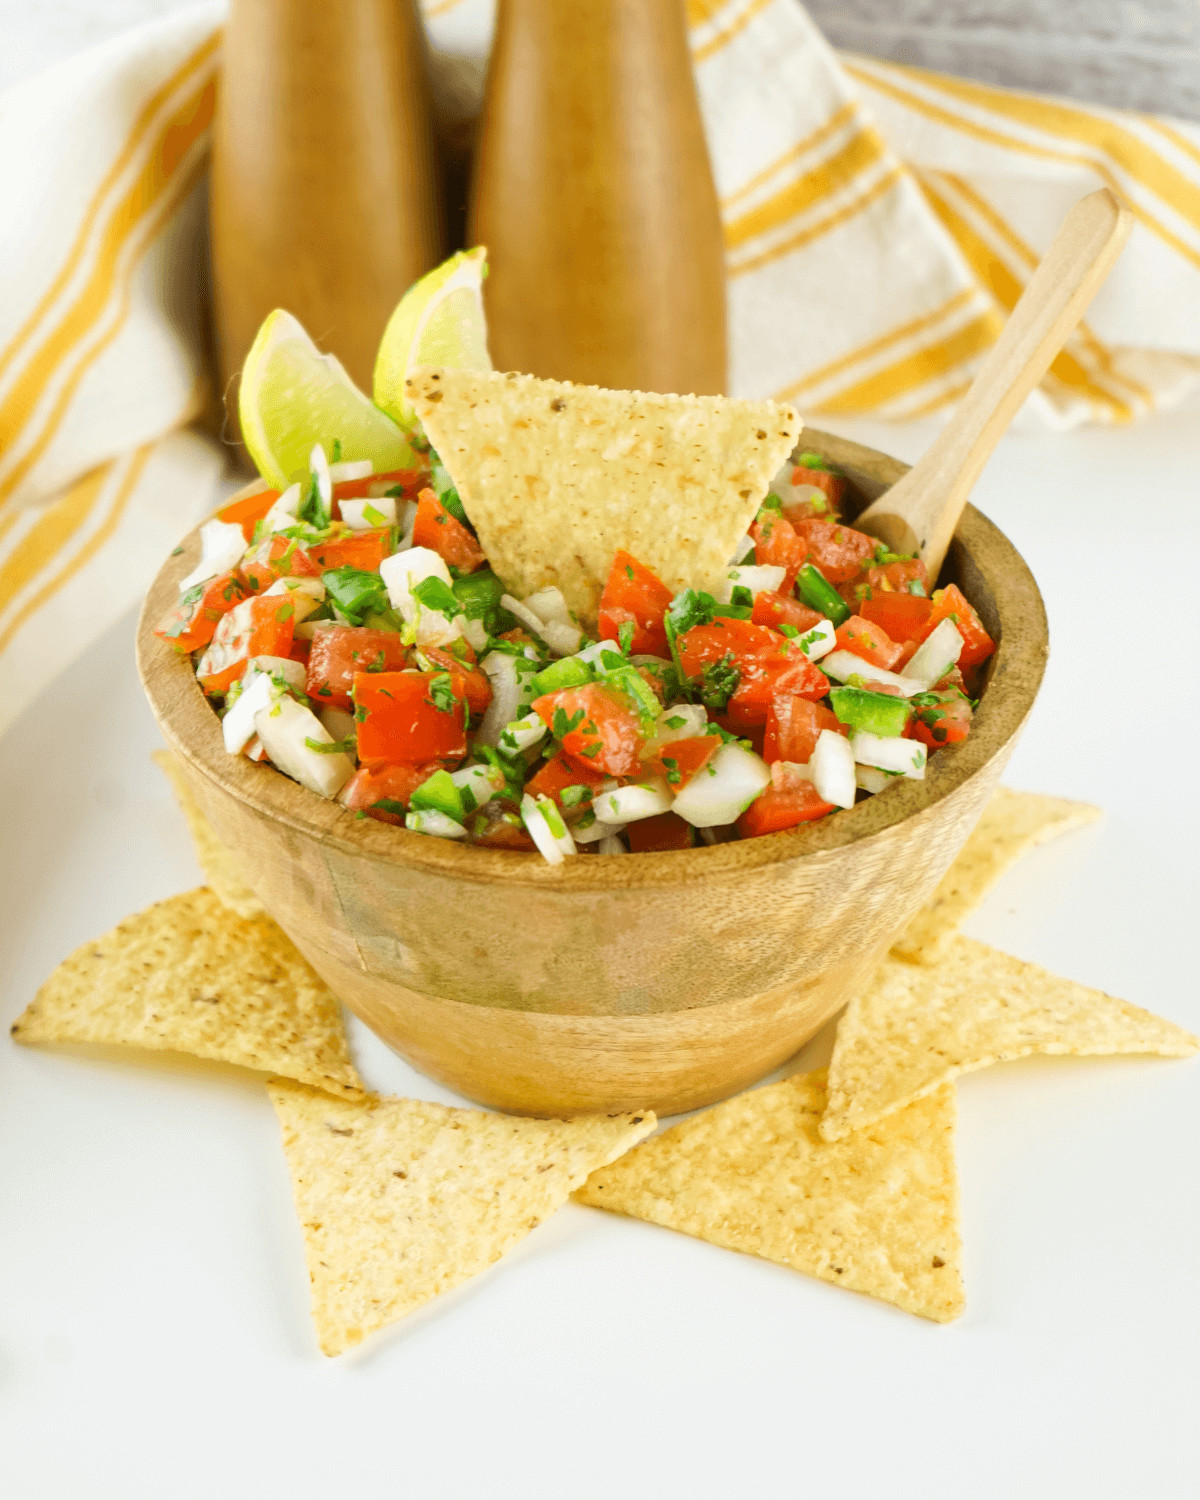 Salsa in a wooden bowl with tortilla chips.